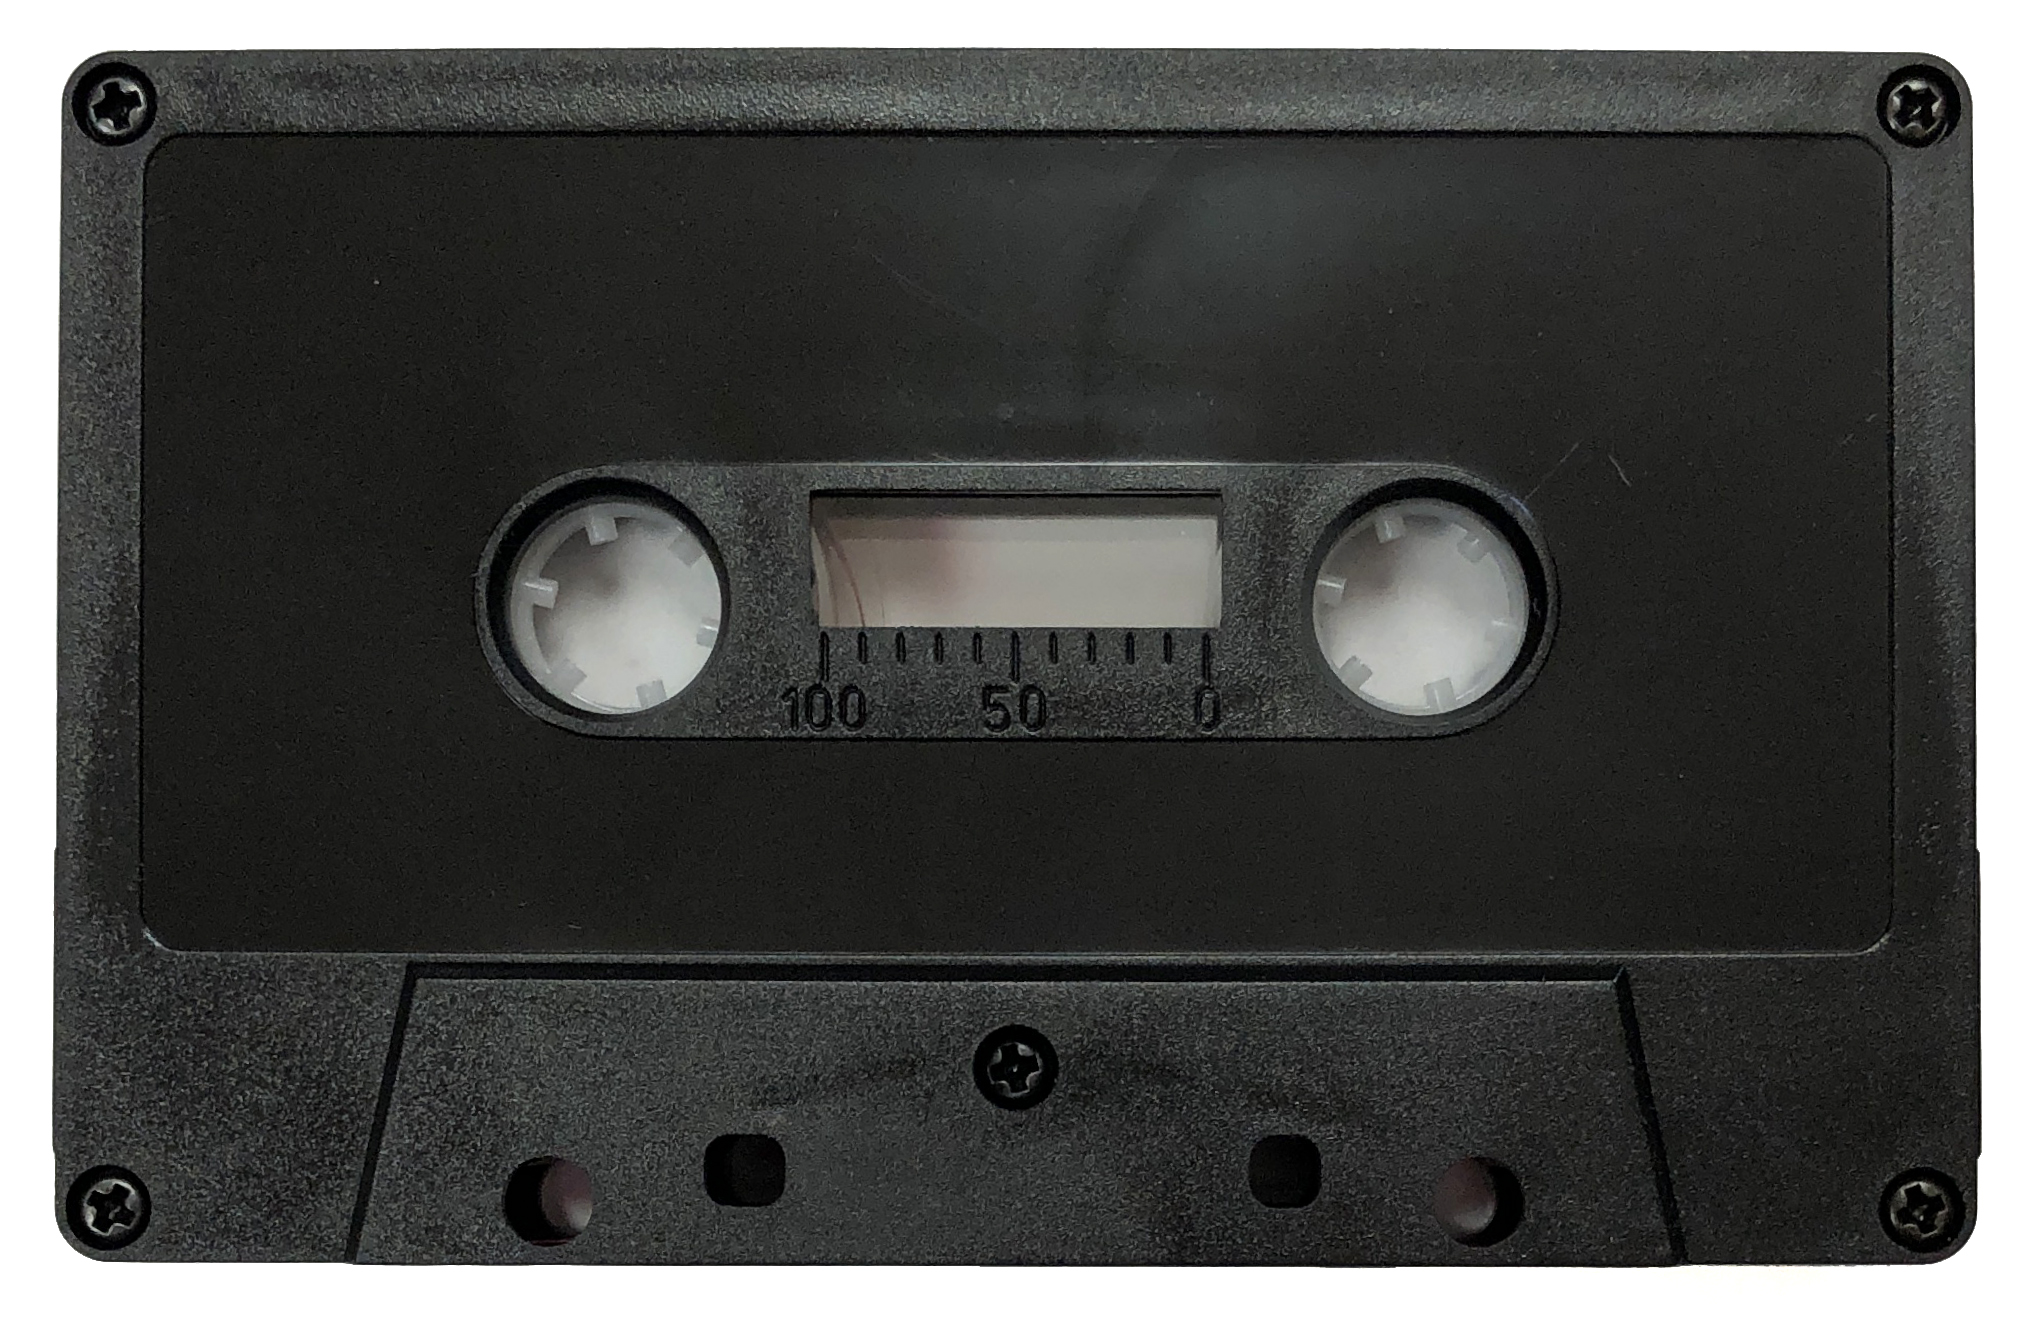 C-12 Glossy Black Tabs-In Cassettes with Hi-Fi Music-Grade Audio Tape  